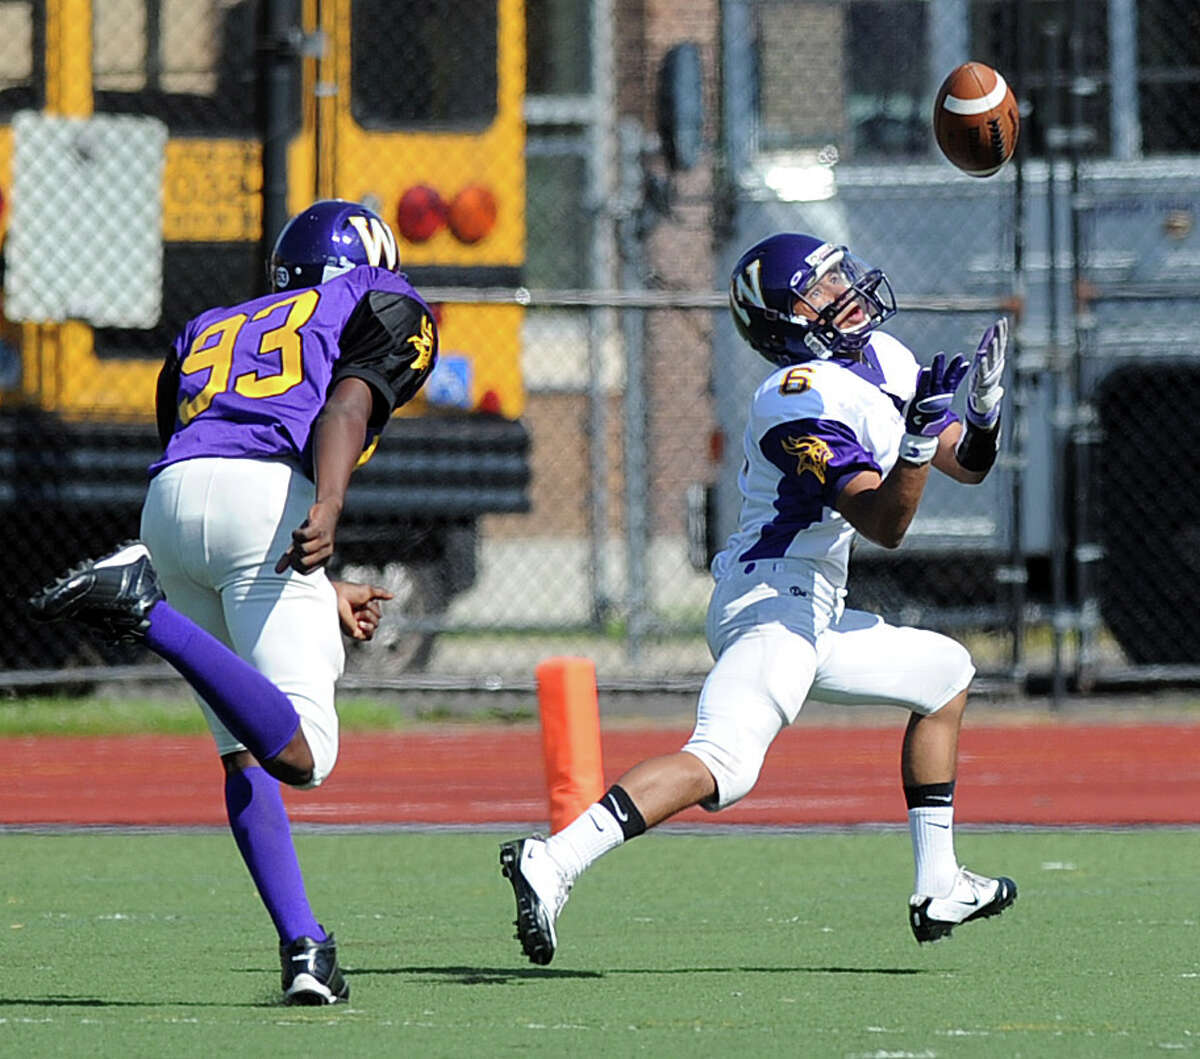 Sean Remondino makes a catch for a touchdown during Saturday's spring football game at Westhill High School on June 16, 2012.